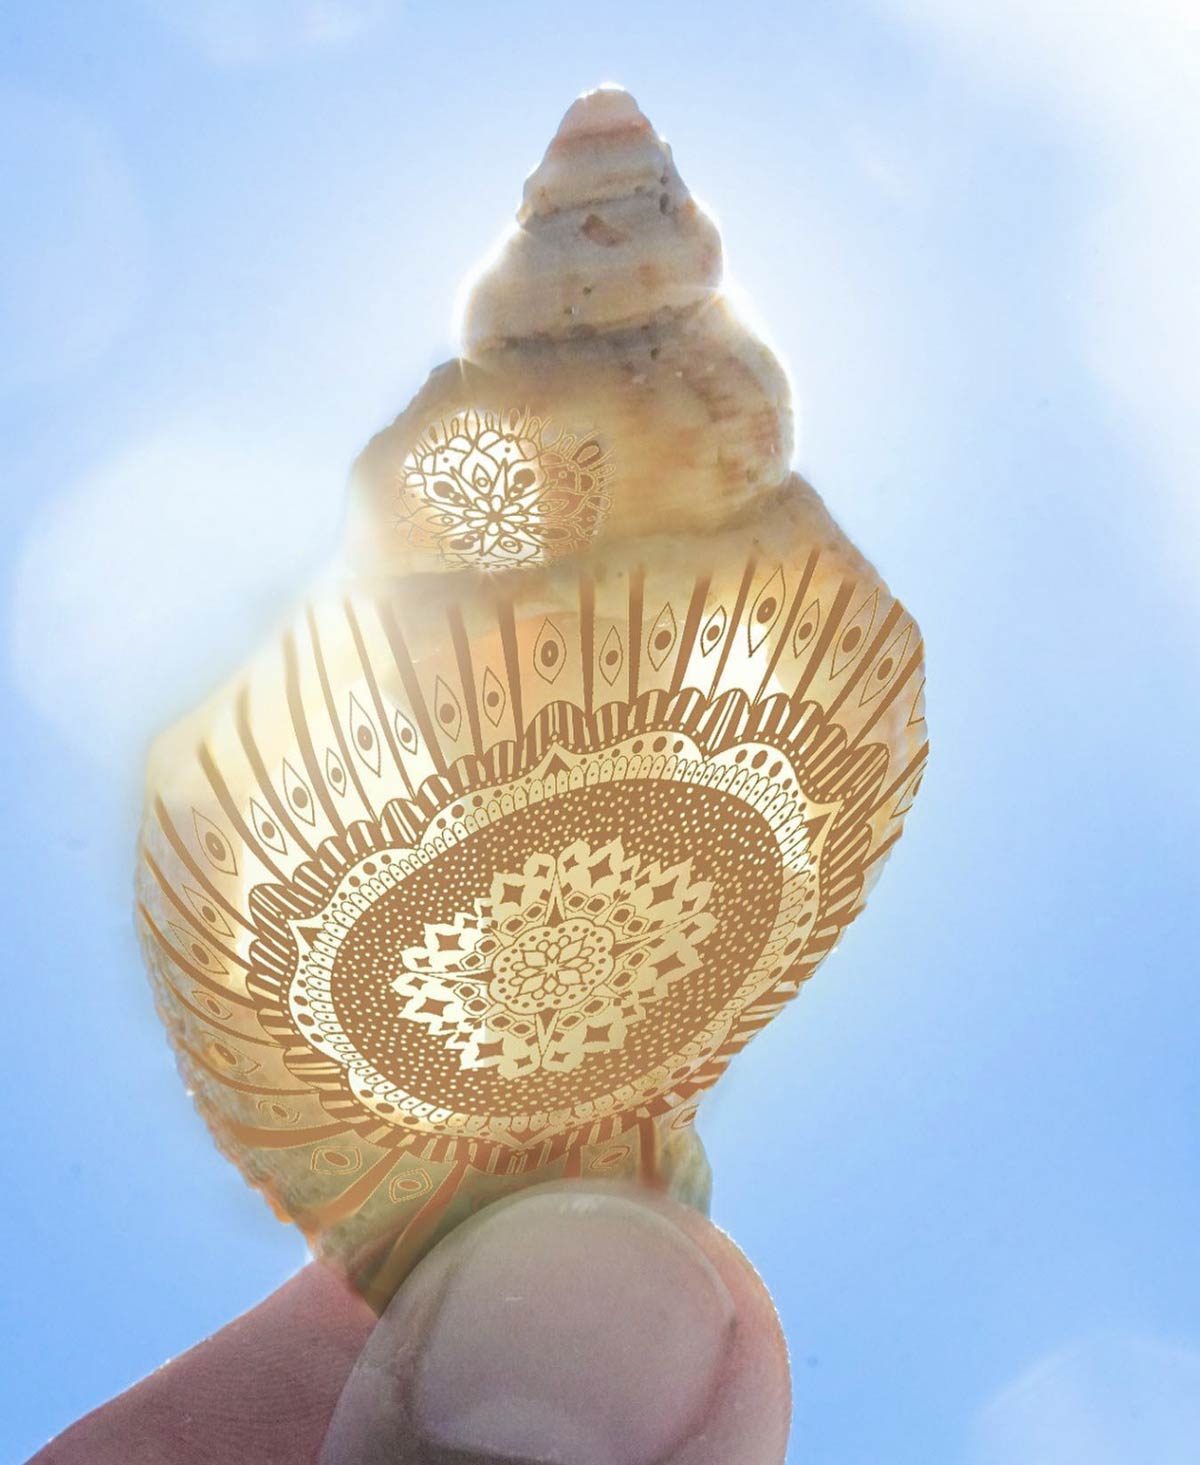 impressive shell with pattern